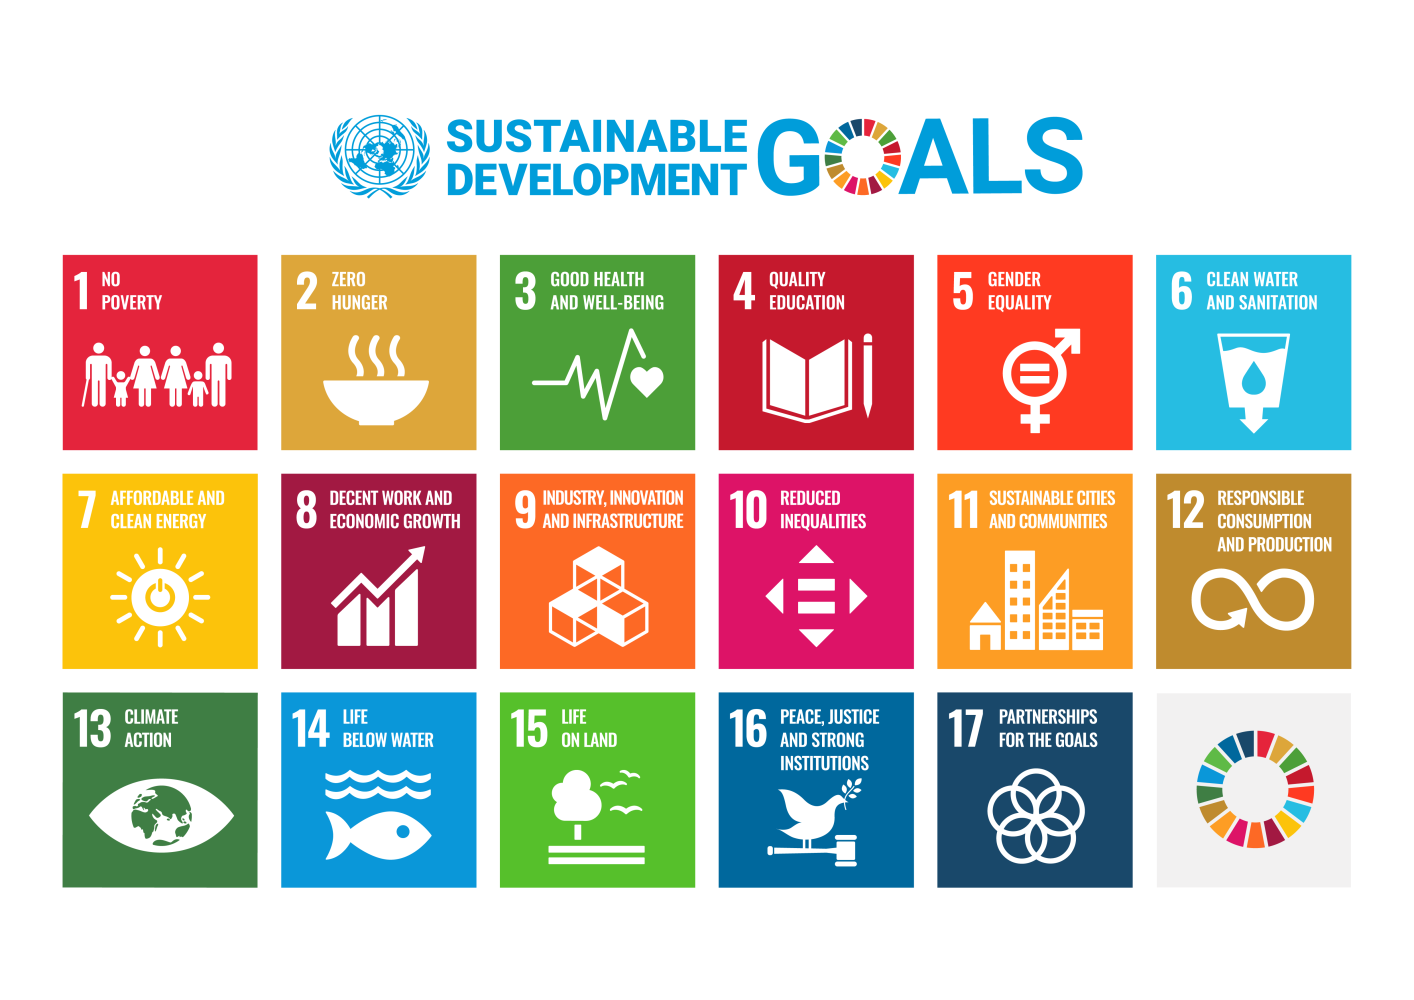 The UN SDGs are available in each of the official UN languages: (Arabic, Chinese, English, French, Russian, Spanish). They can be downloaded at: https://www.un.org/sustainabledevelopment/news/communications-material/